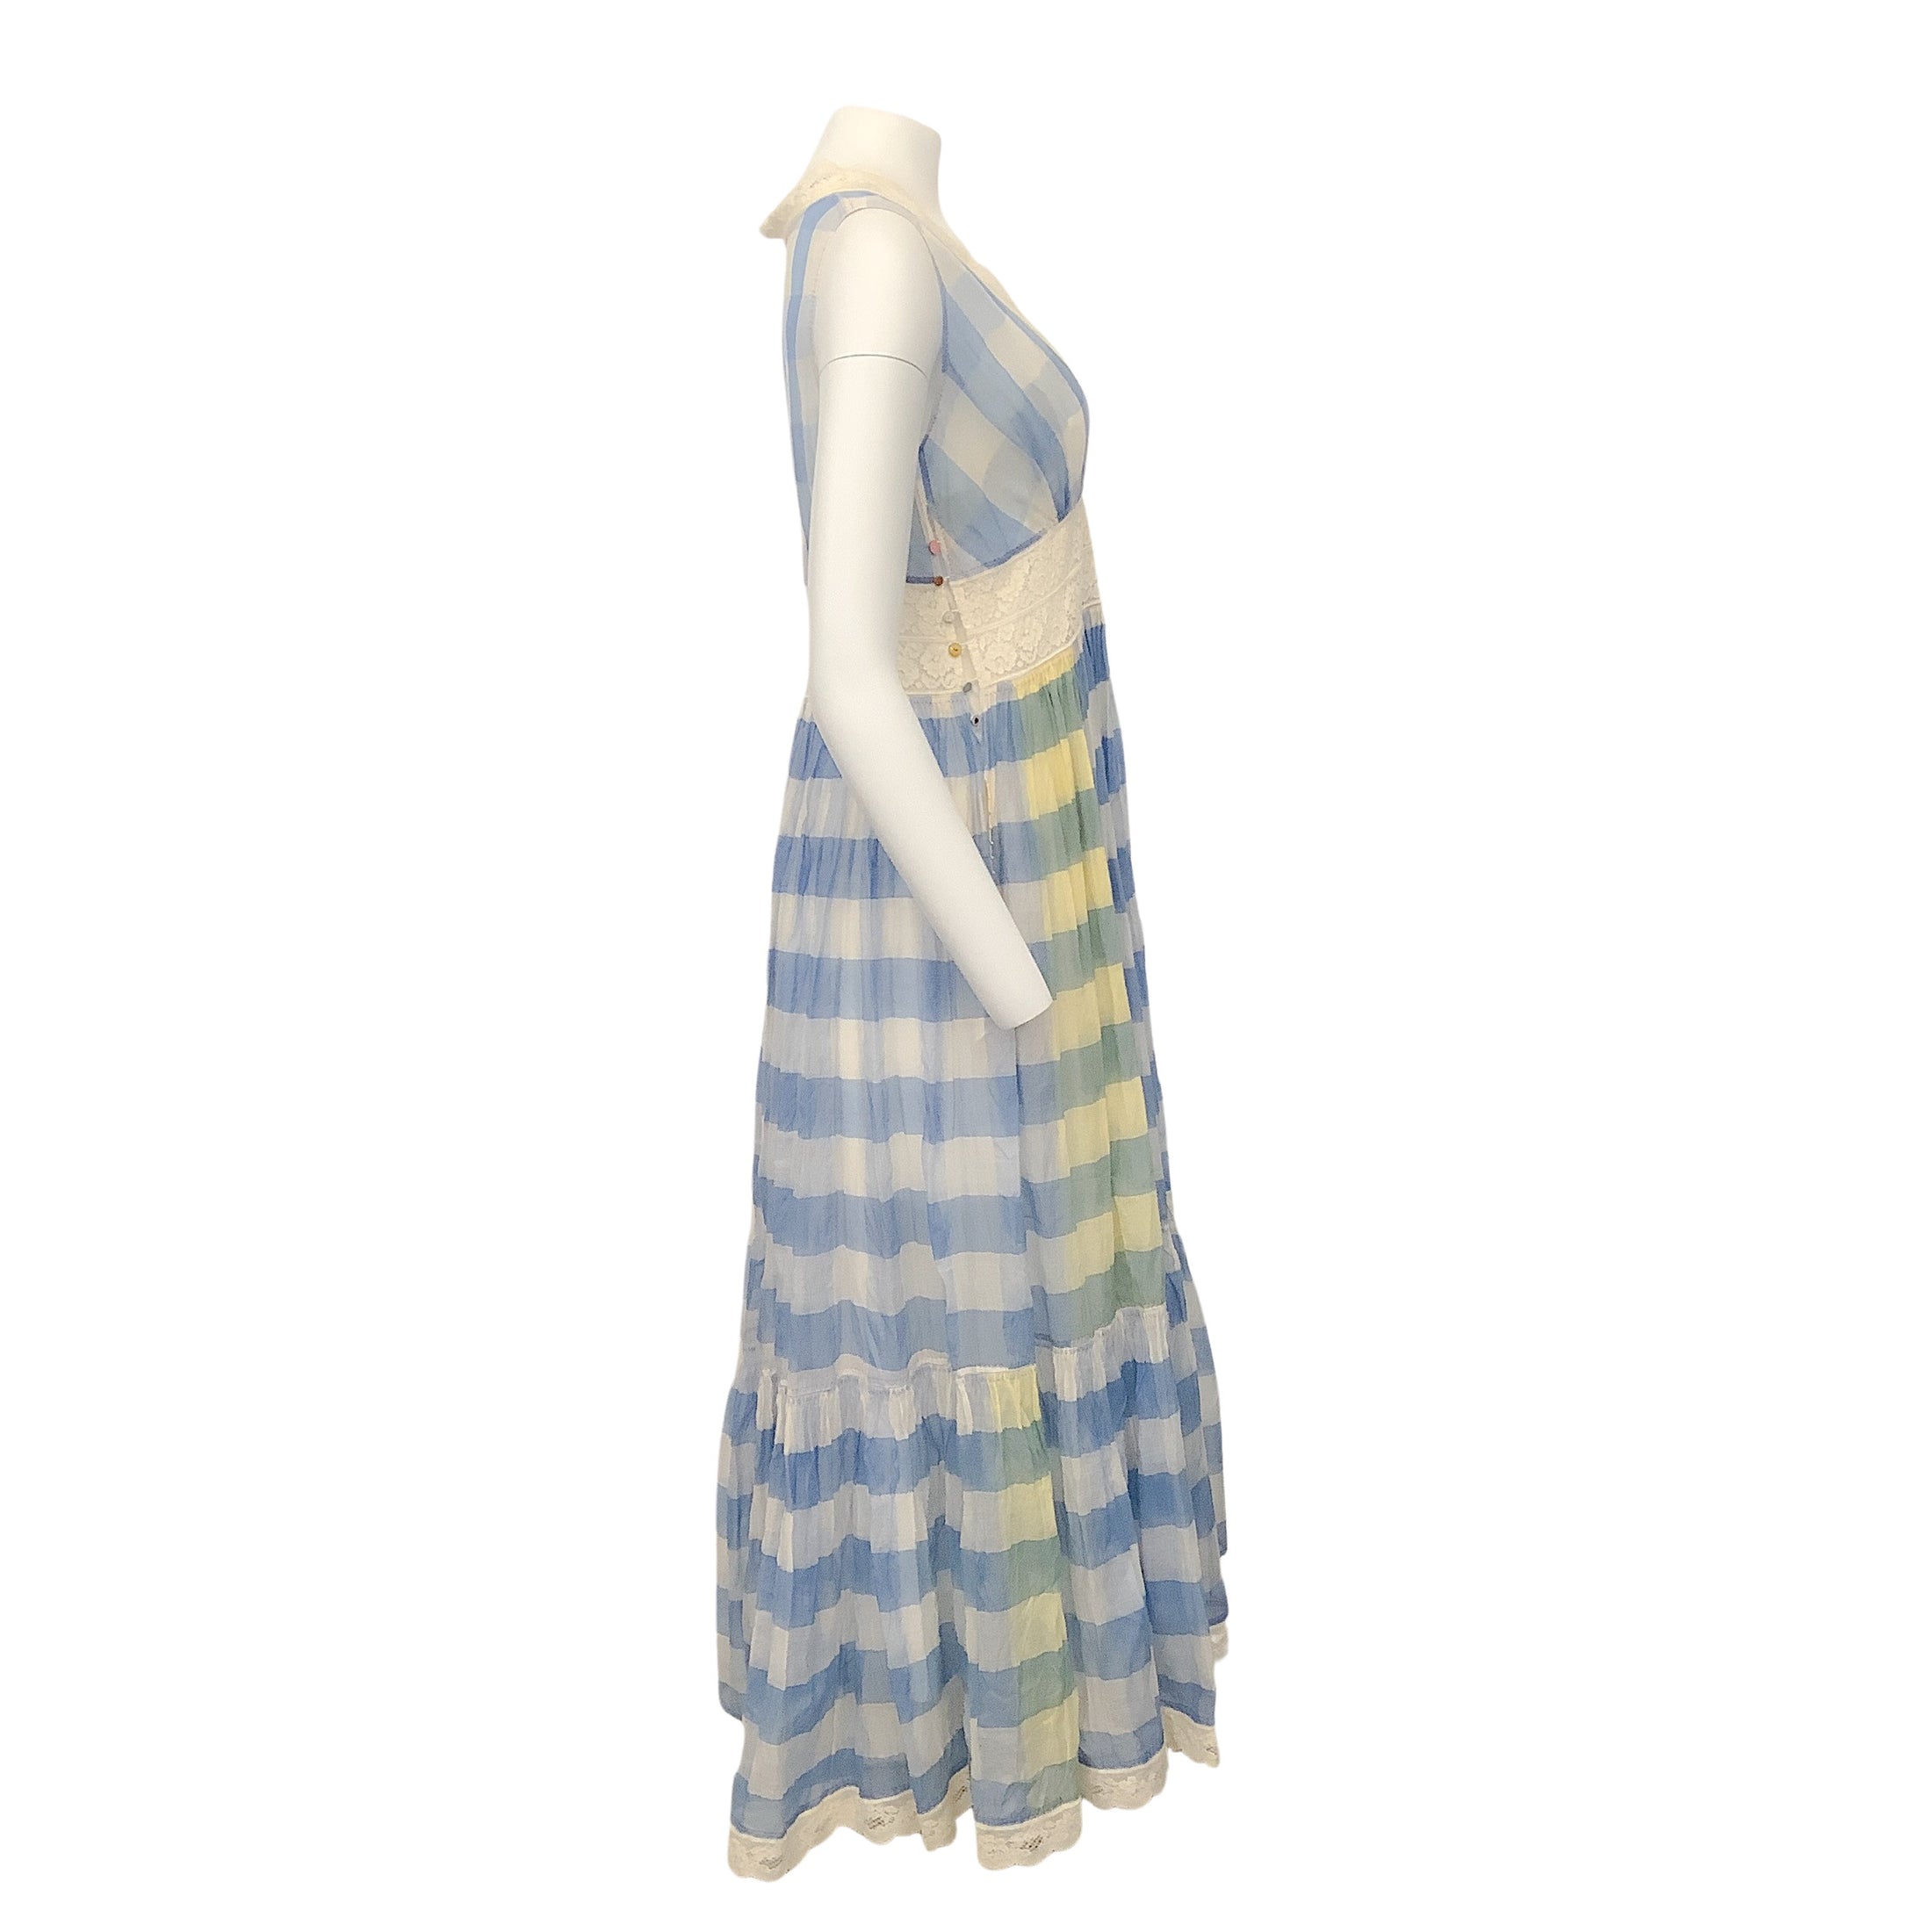 Pero Blue / White Gingham Sleeveless Maxi Dress with Lace